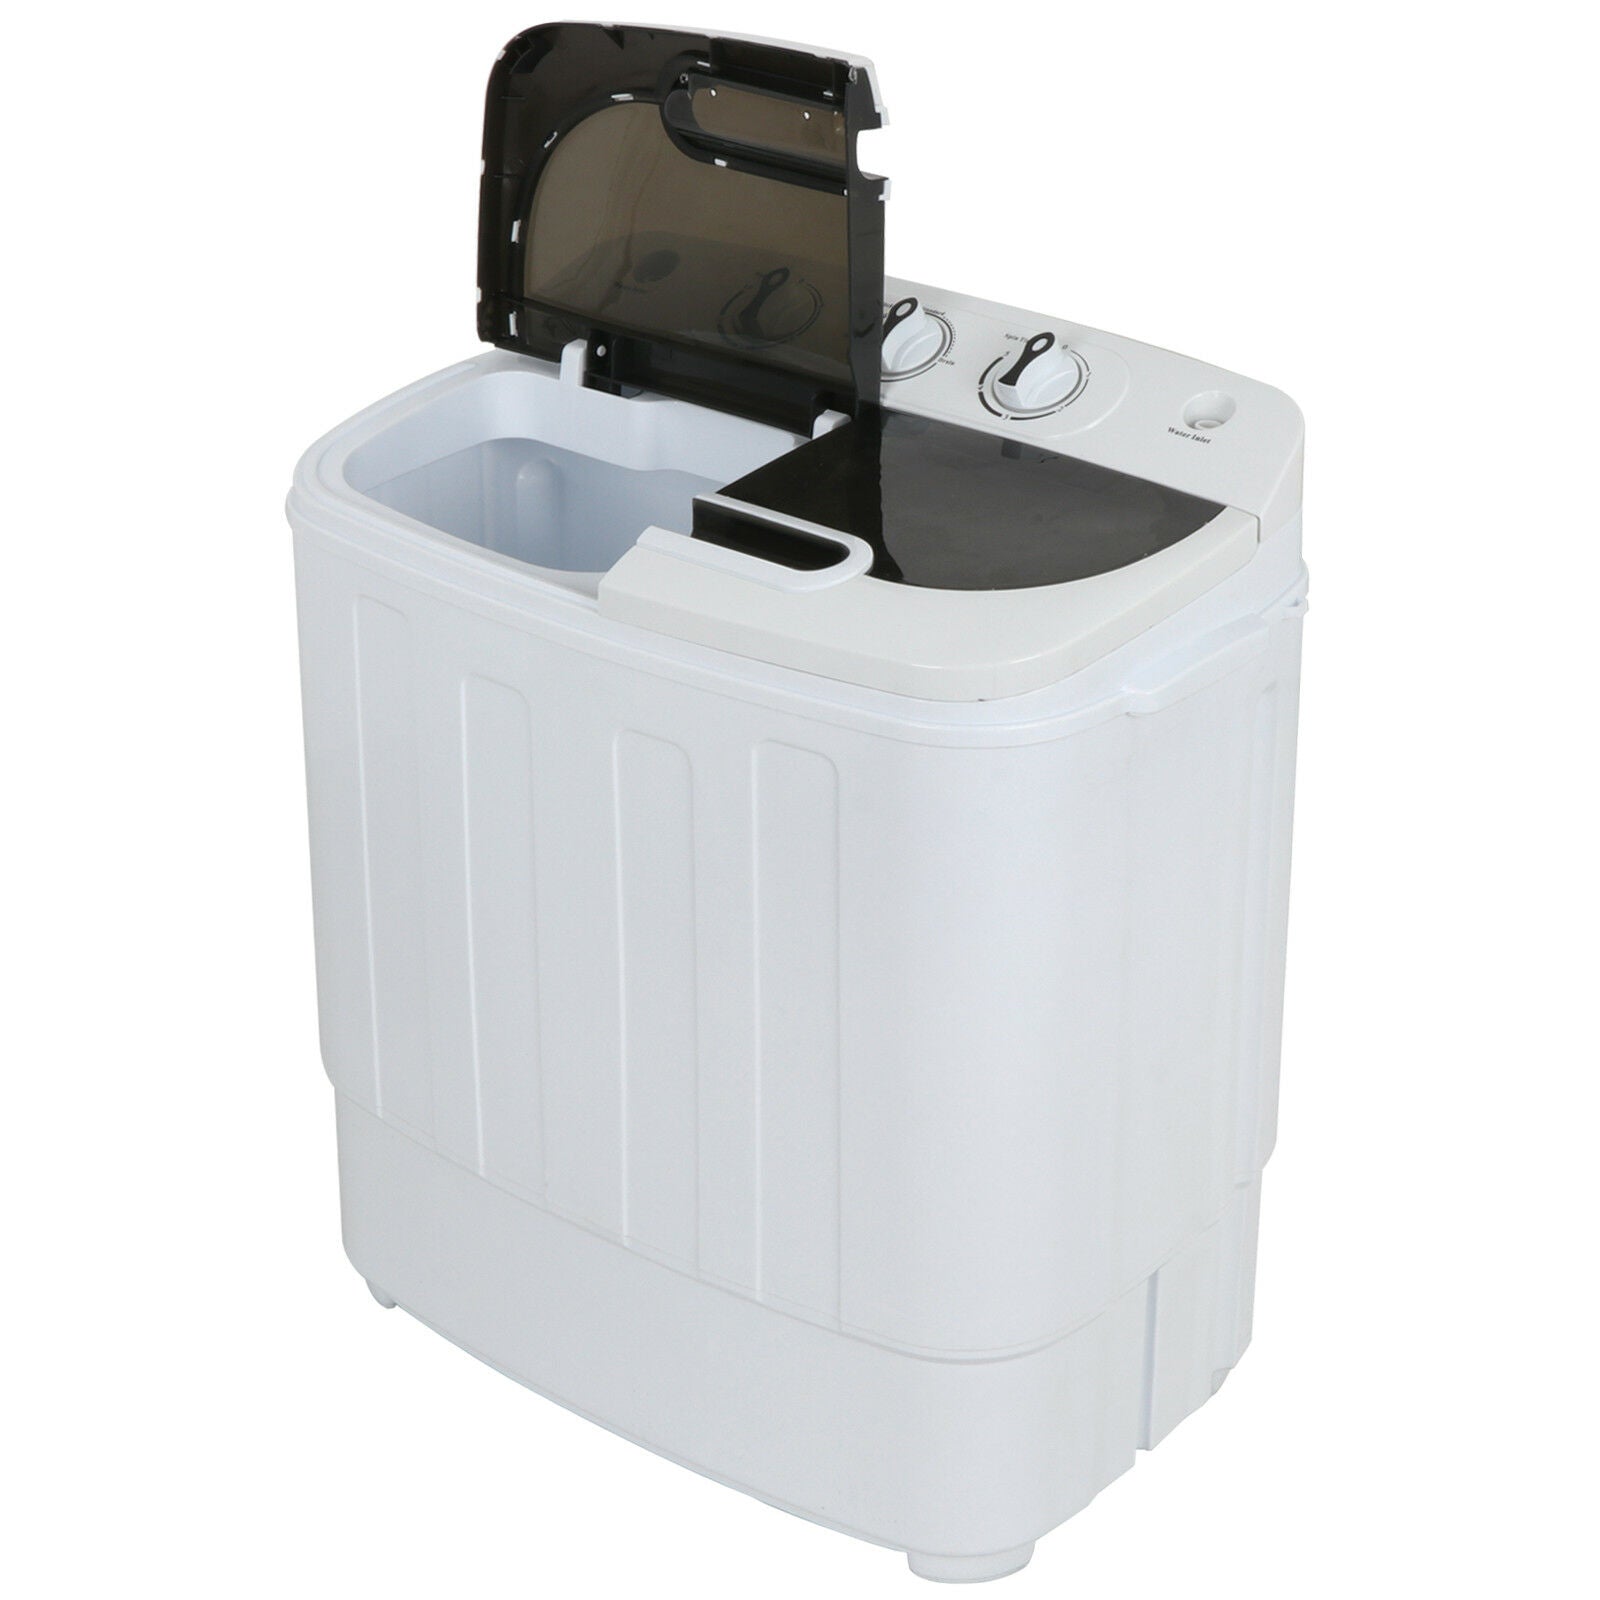 Compact Portable Washer/Dryer with Mini Washing Machine and Spin Dryer, White